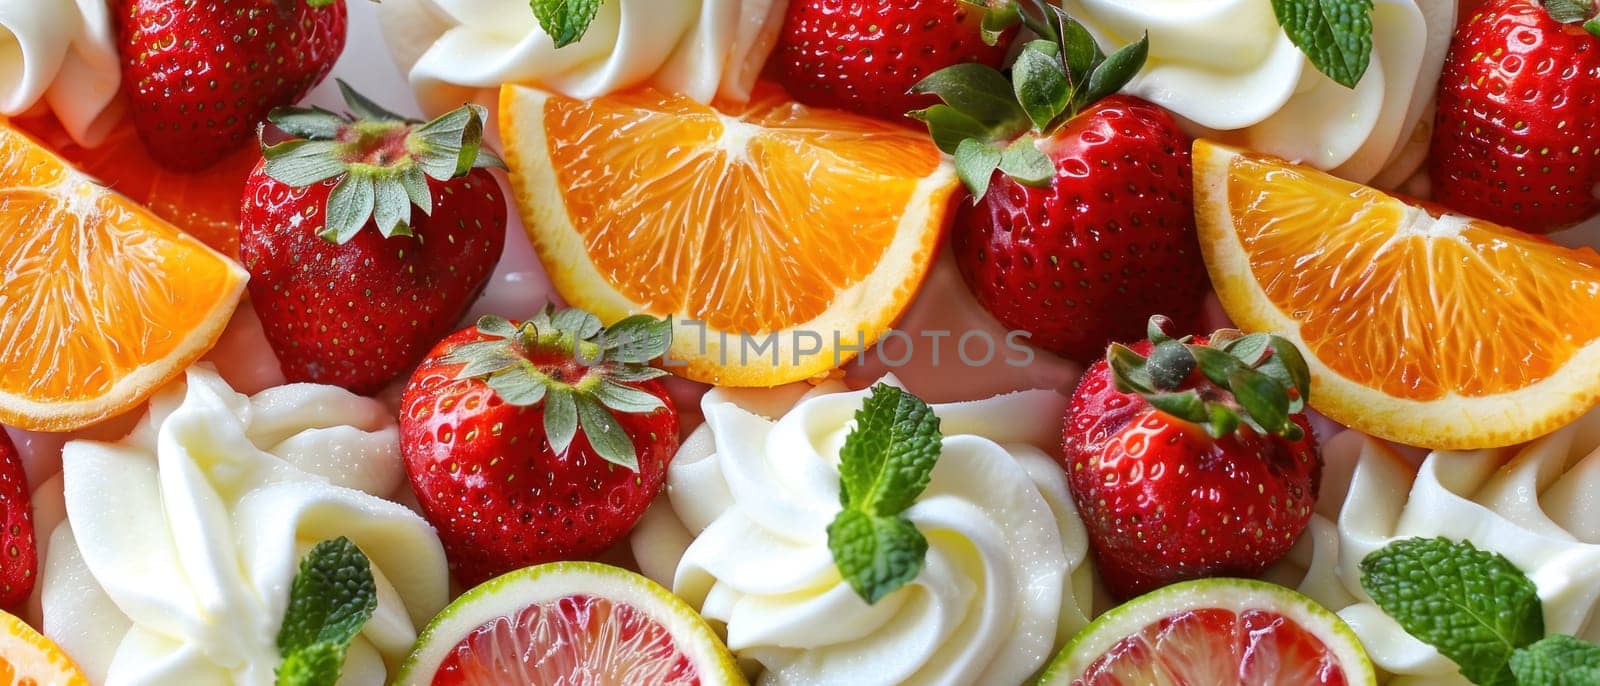 A fruit platter with cream strawberries, oranges, and lime.